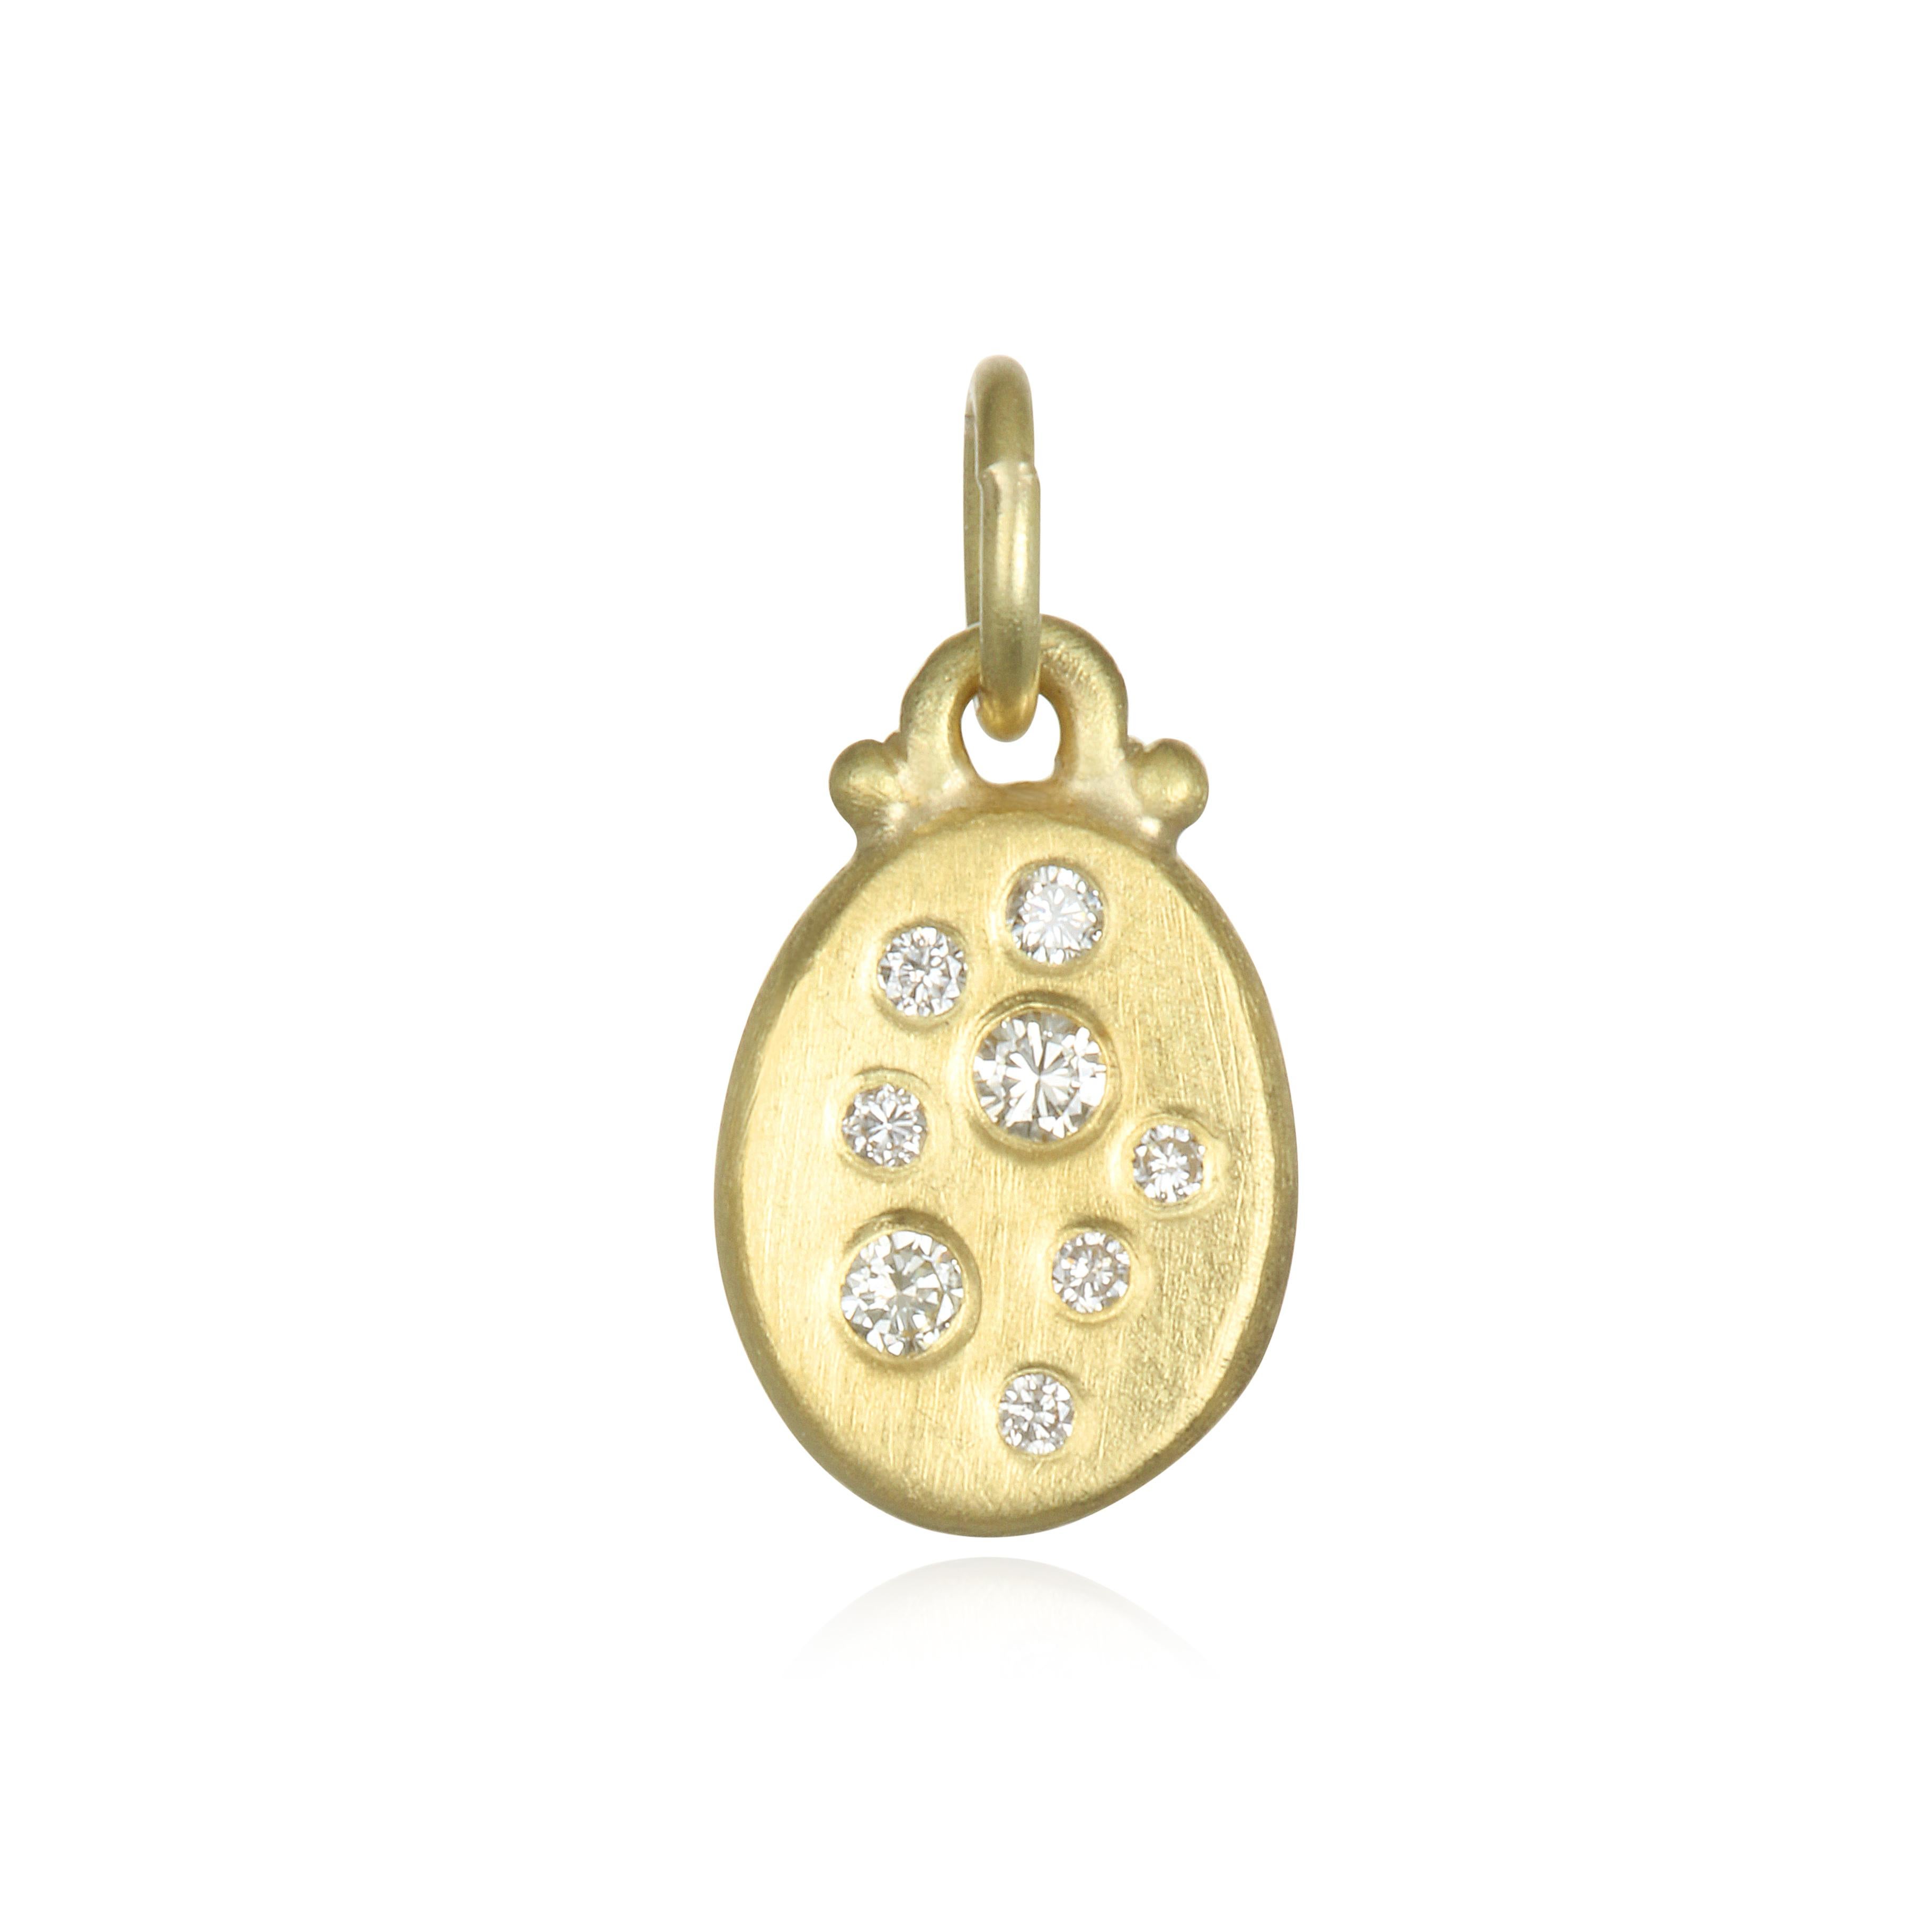 Versatile and easy to wear, the mini version of Faye's popular diamond Dog Tag pendants are perfect for everyday. The pendant is matte-finished in 18K Green Gold and hangs on a 16-18